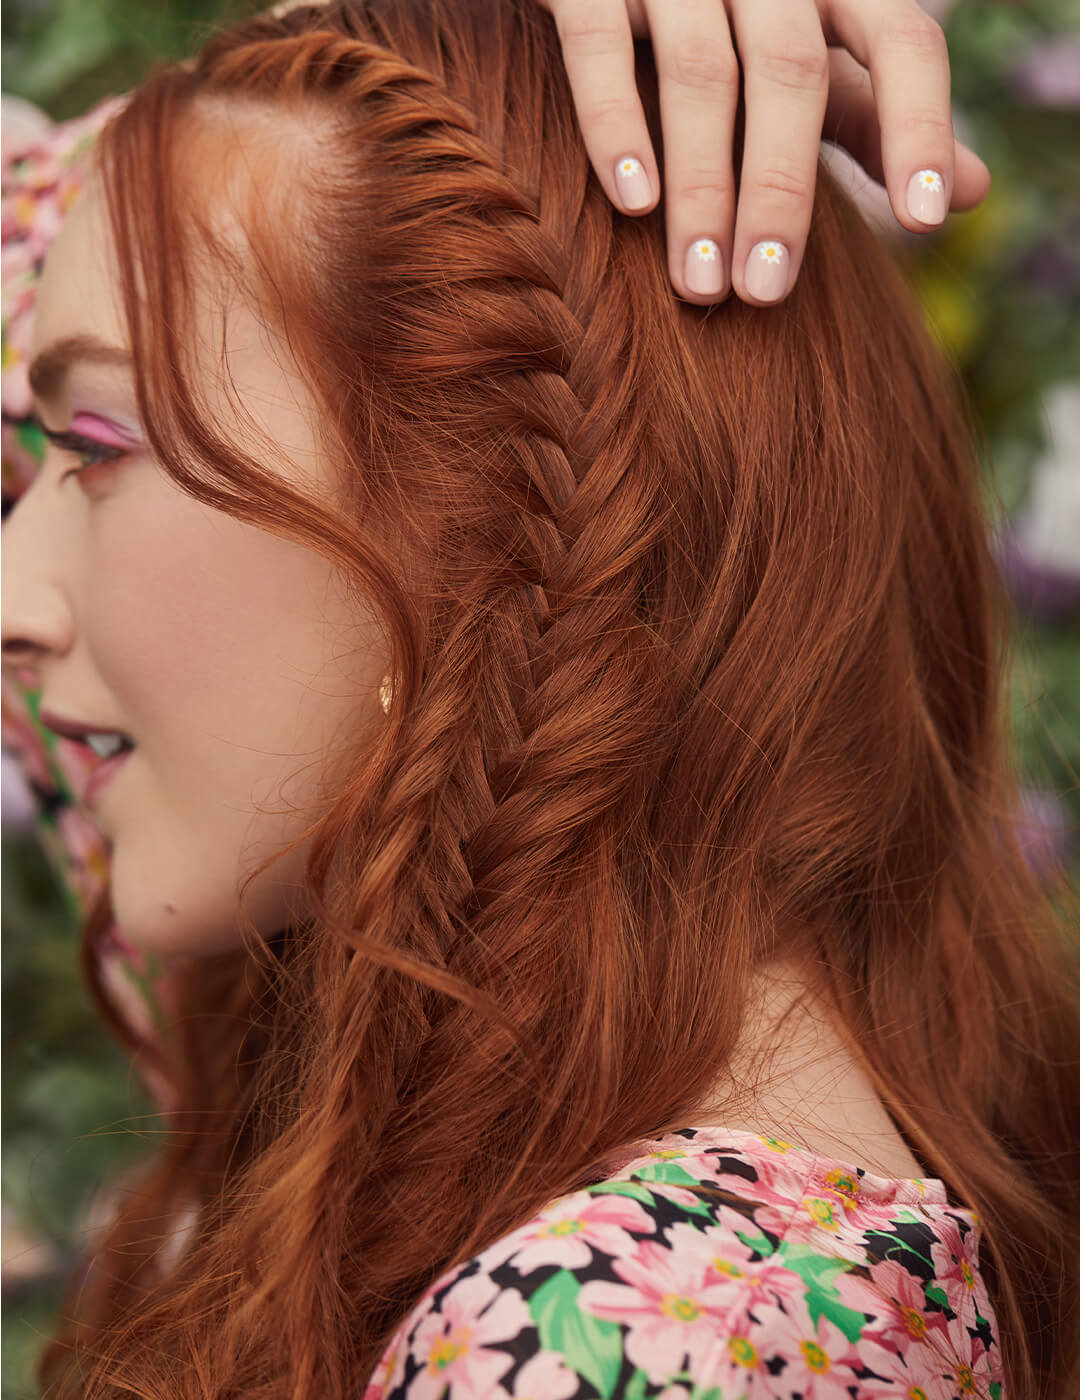 Close-up profile image of a red-haired model with side fishtail braids in a floral outfit posing